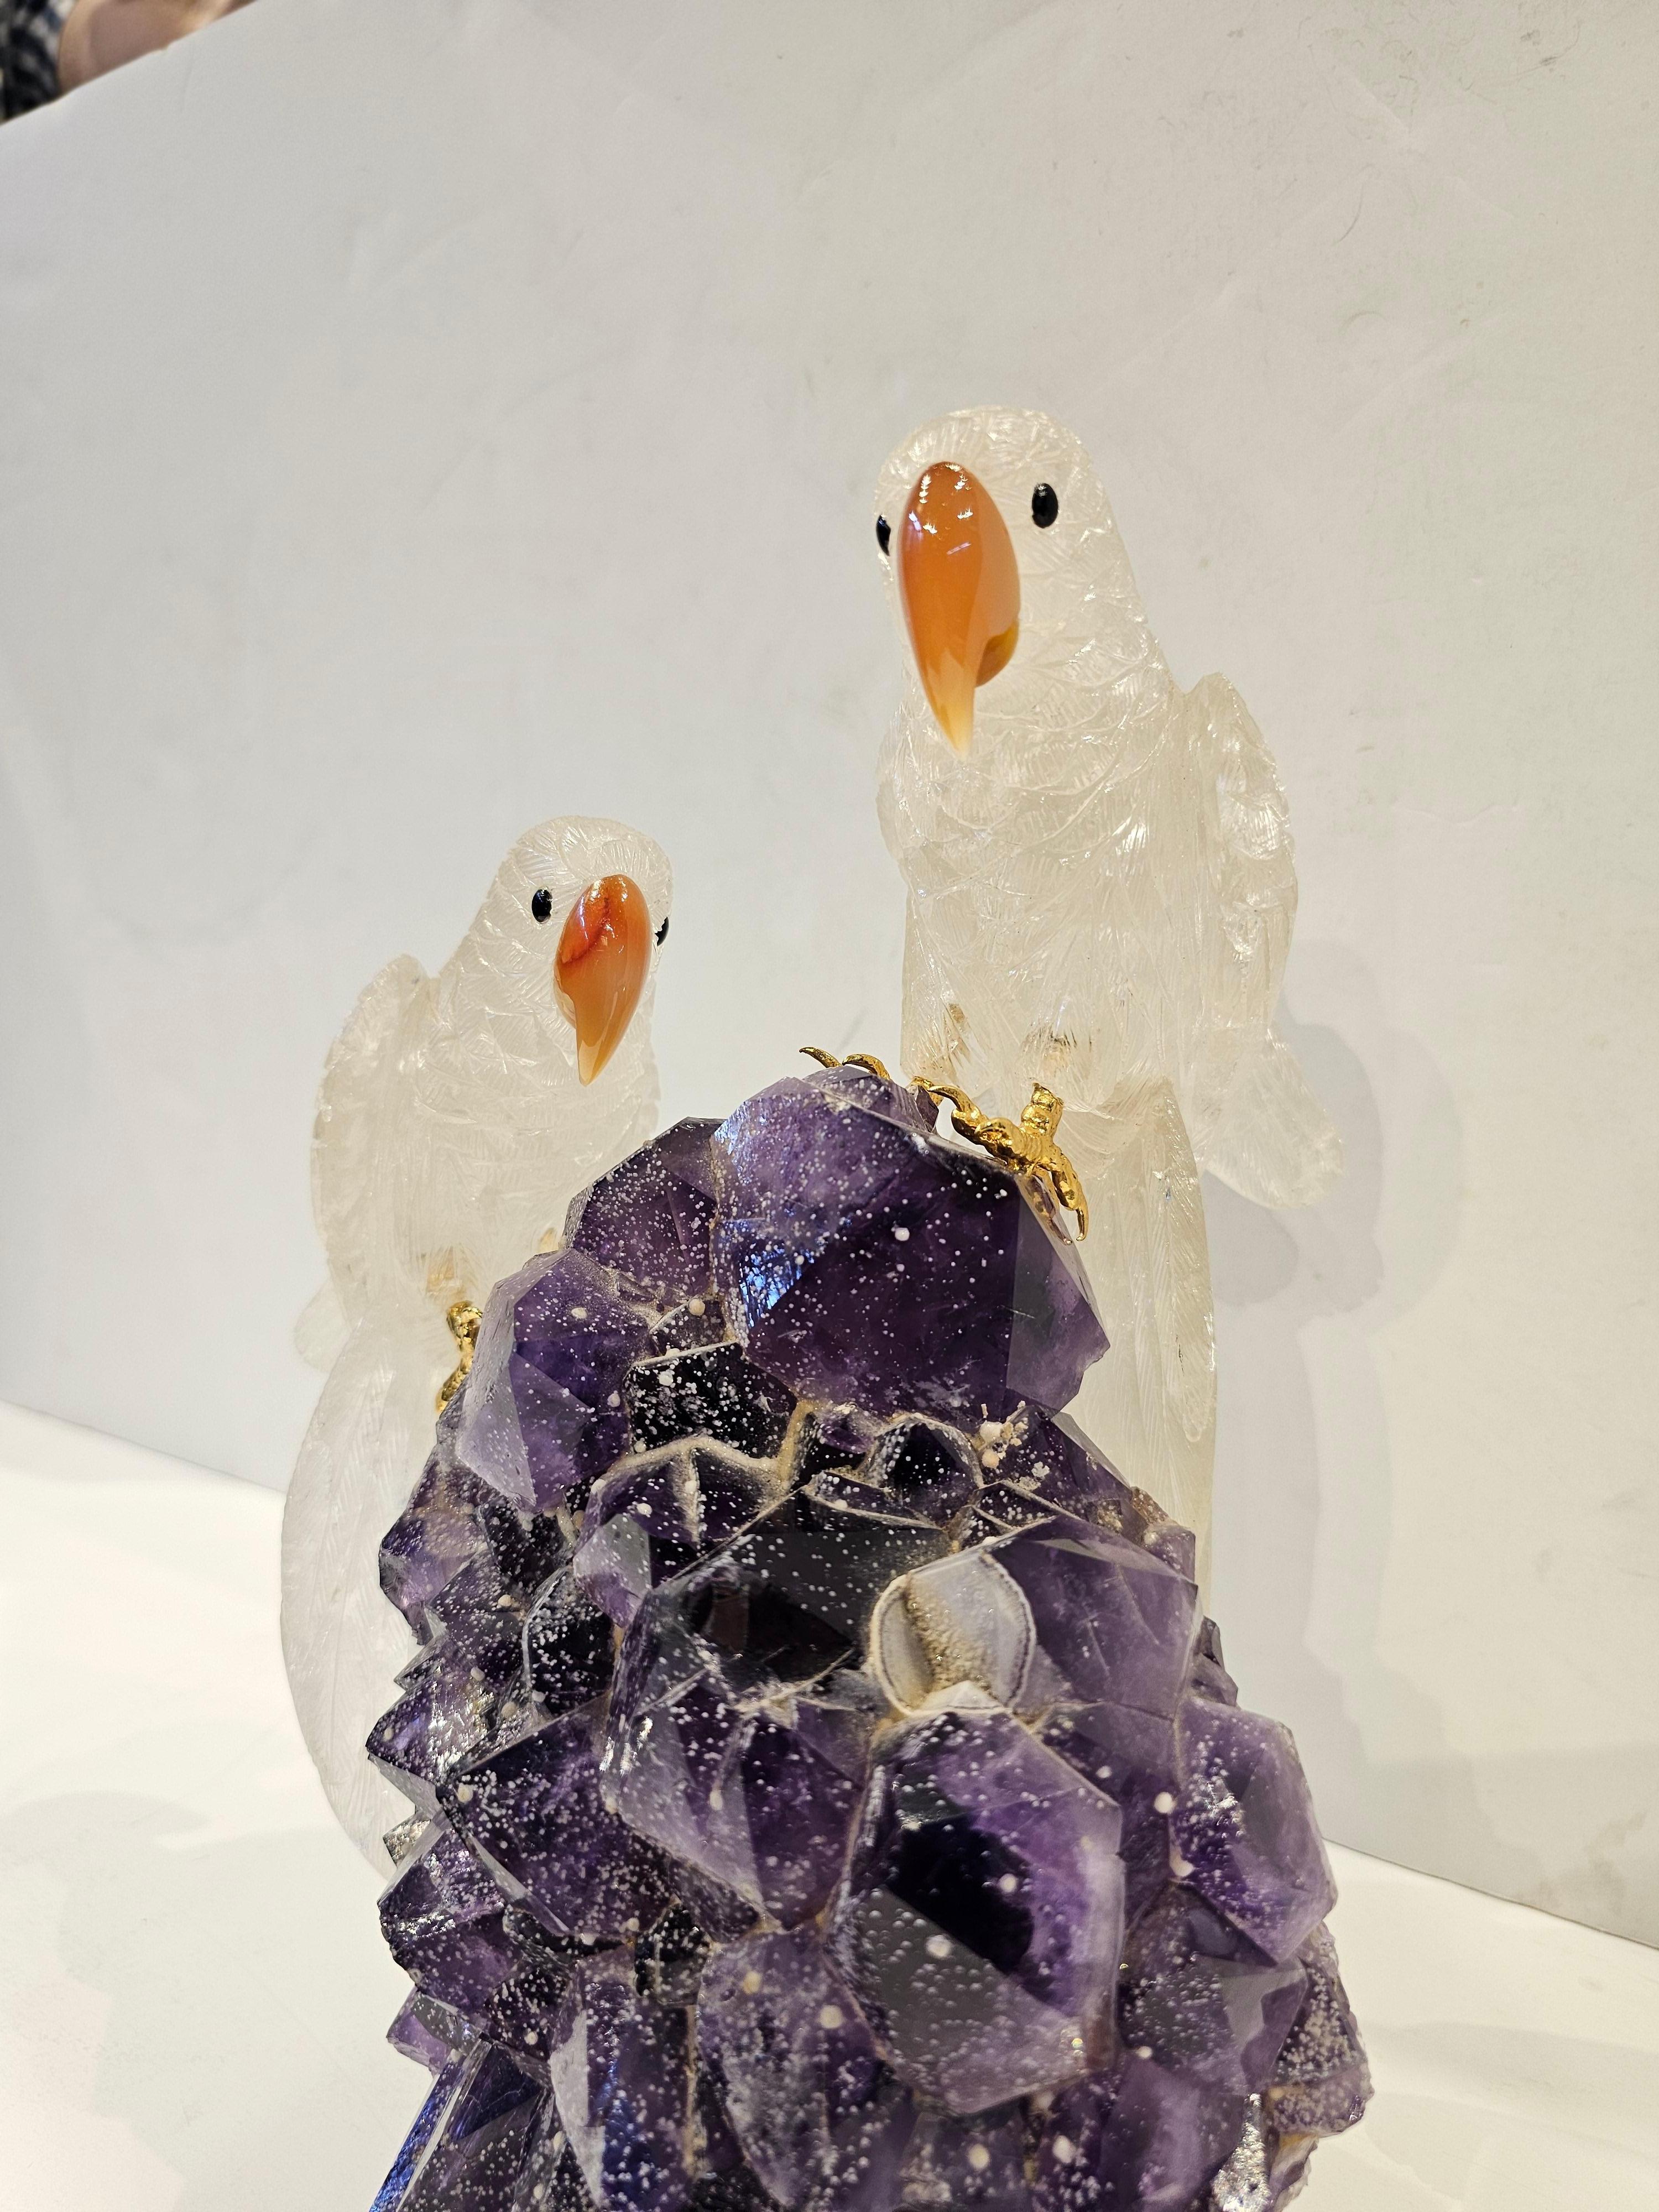 Boucheron Amethyst & Rock Crystal Bird Desk Object In Excellent Condition For Sale In New York, NY